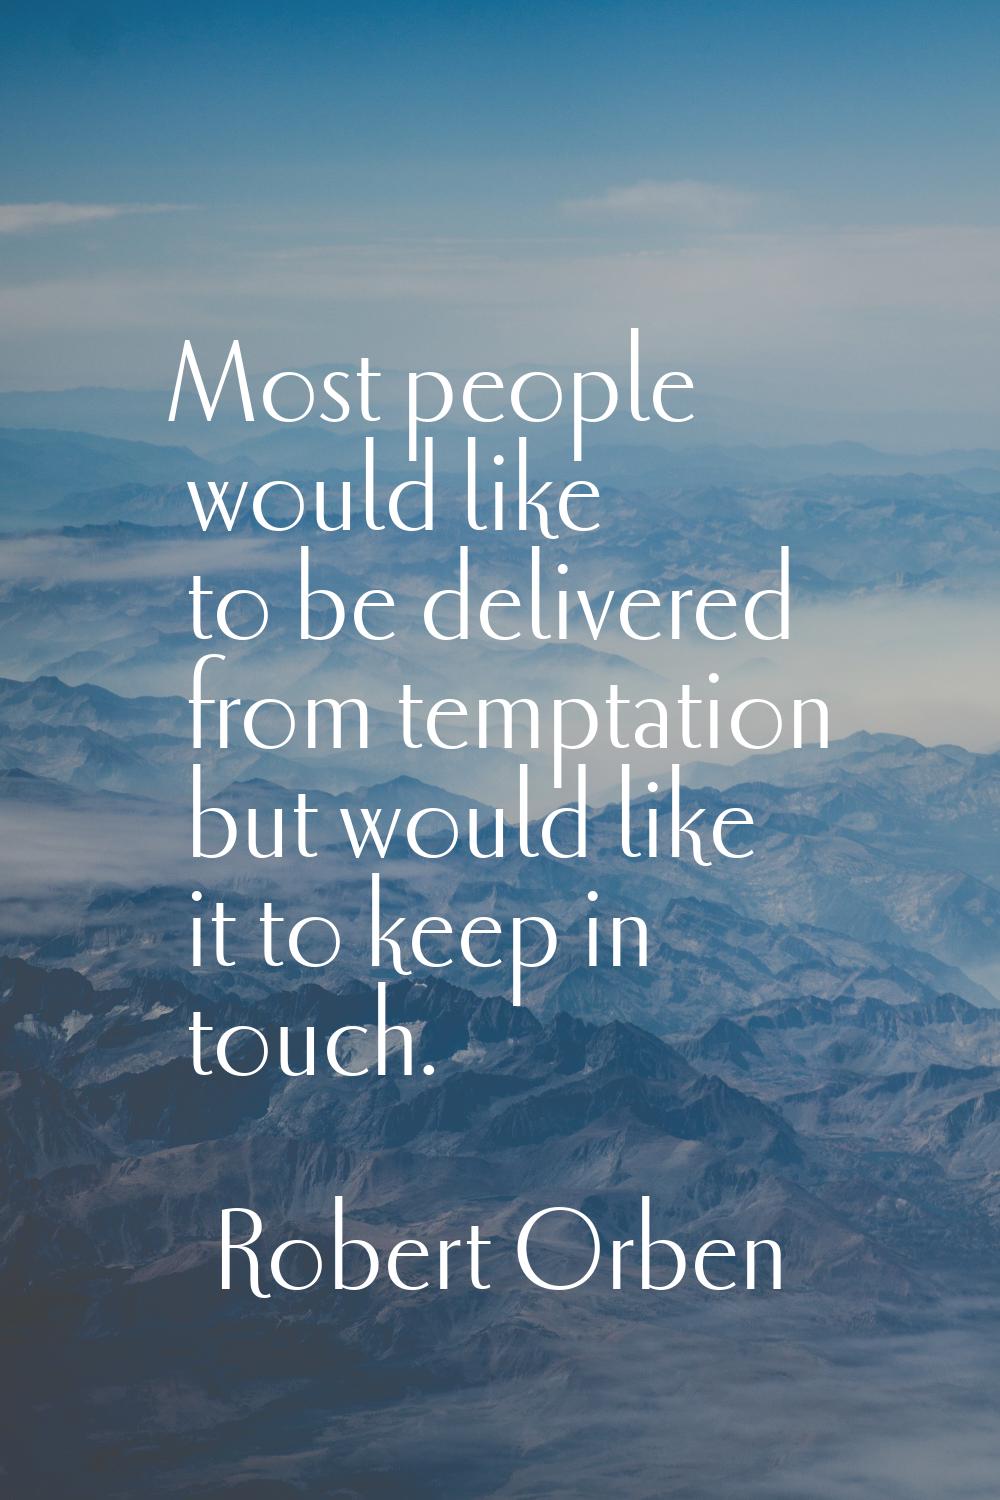 Most people would like to be delivered from temptation but would like it to keep in touch.